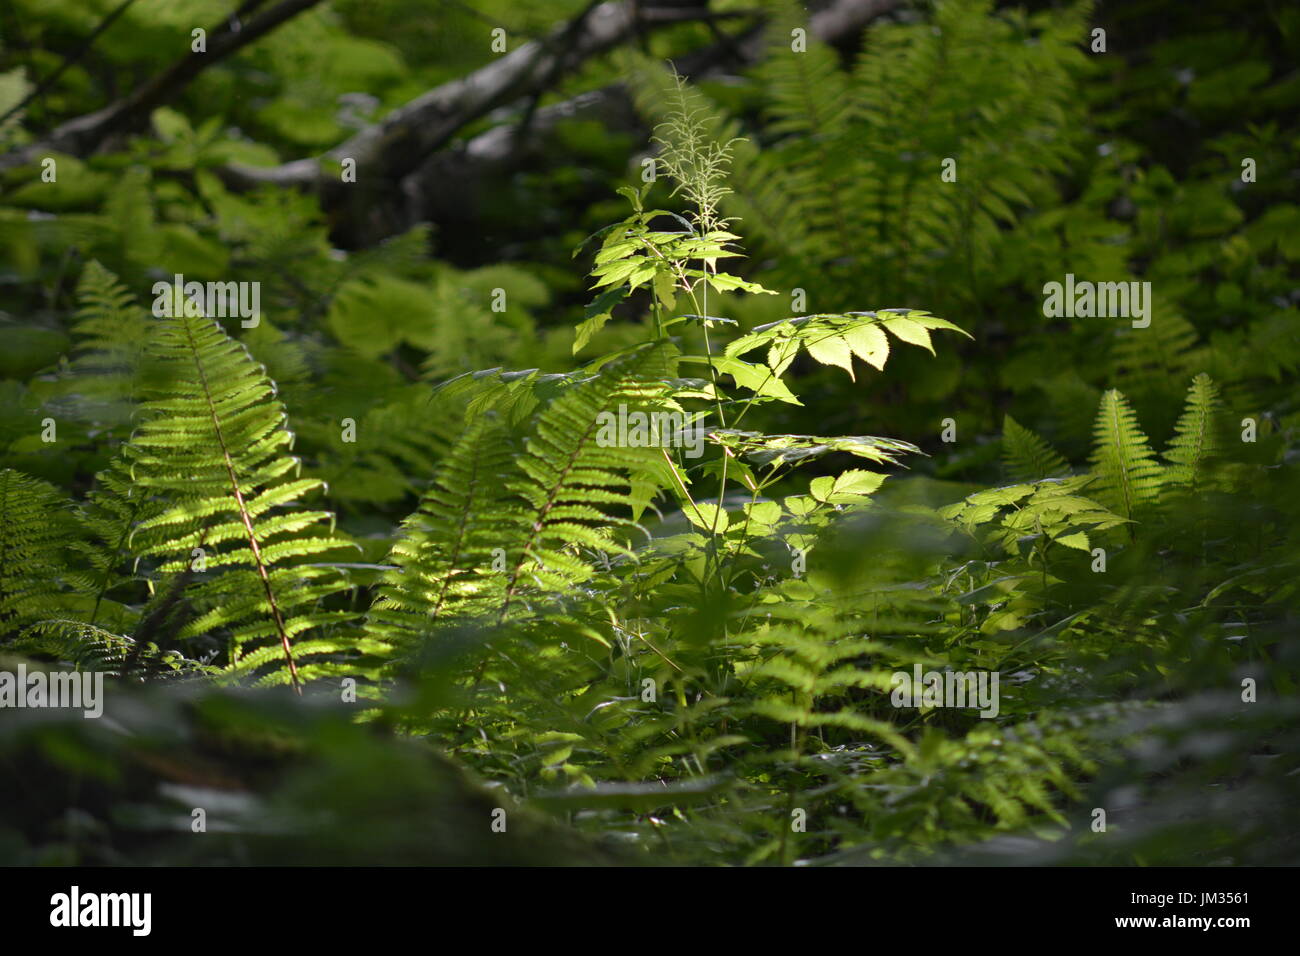 Berchtesgaden, Germany - June 8, 2017 - Beautiful fern with lights and shadows Stock Photo